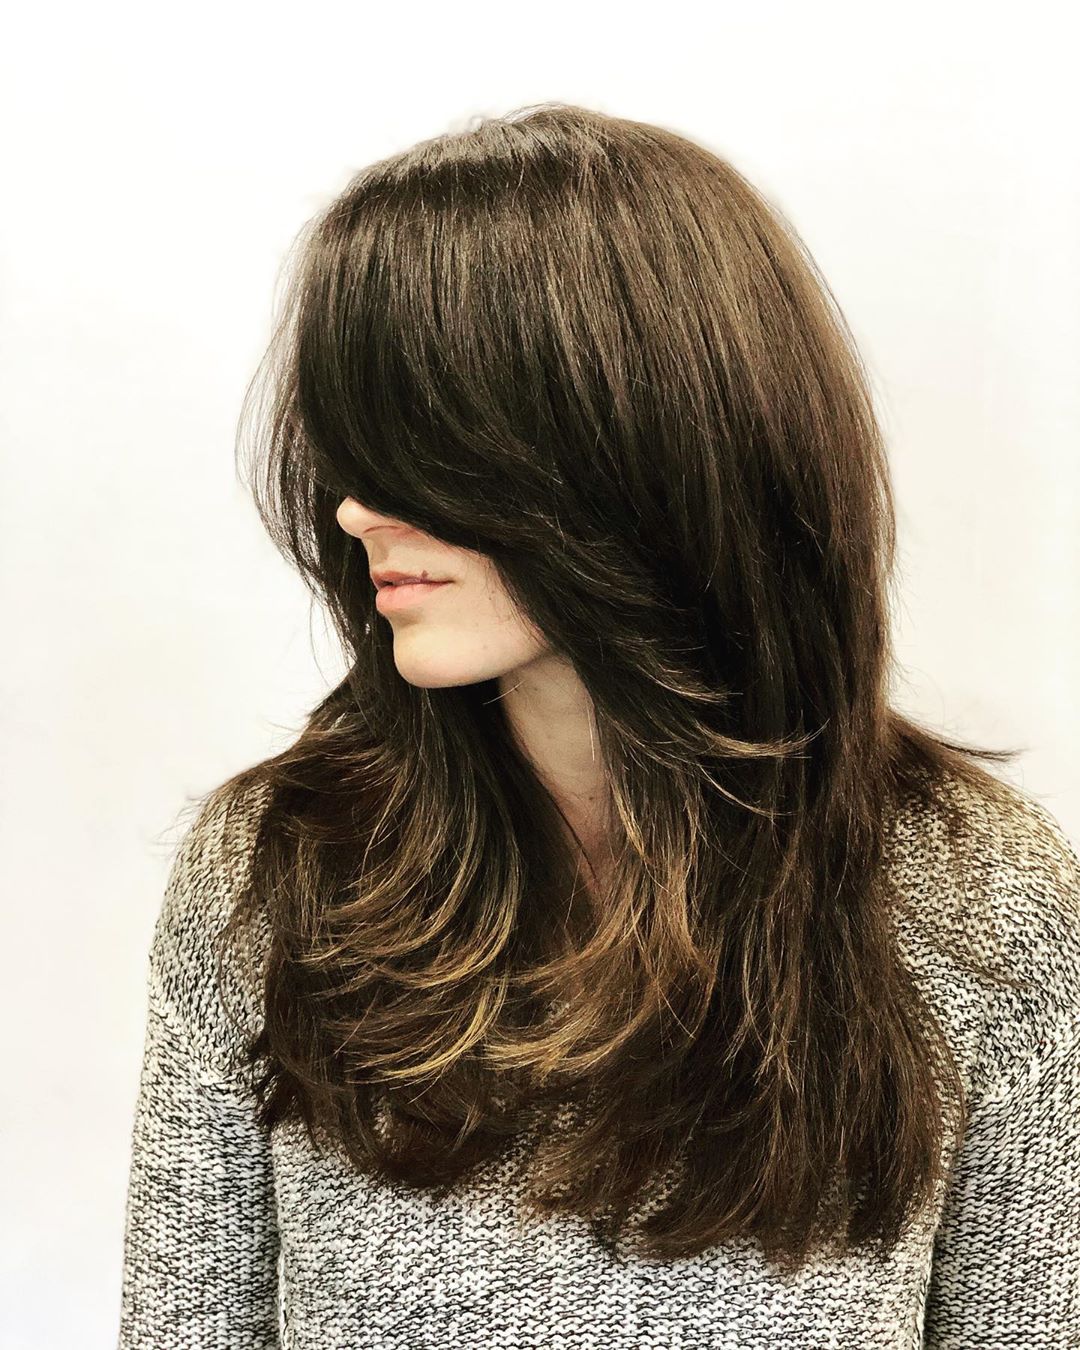 Stunning Long Shaggy Hair with Side-Swept Bangs